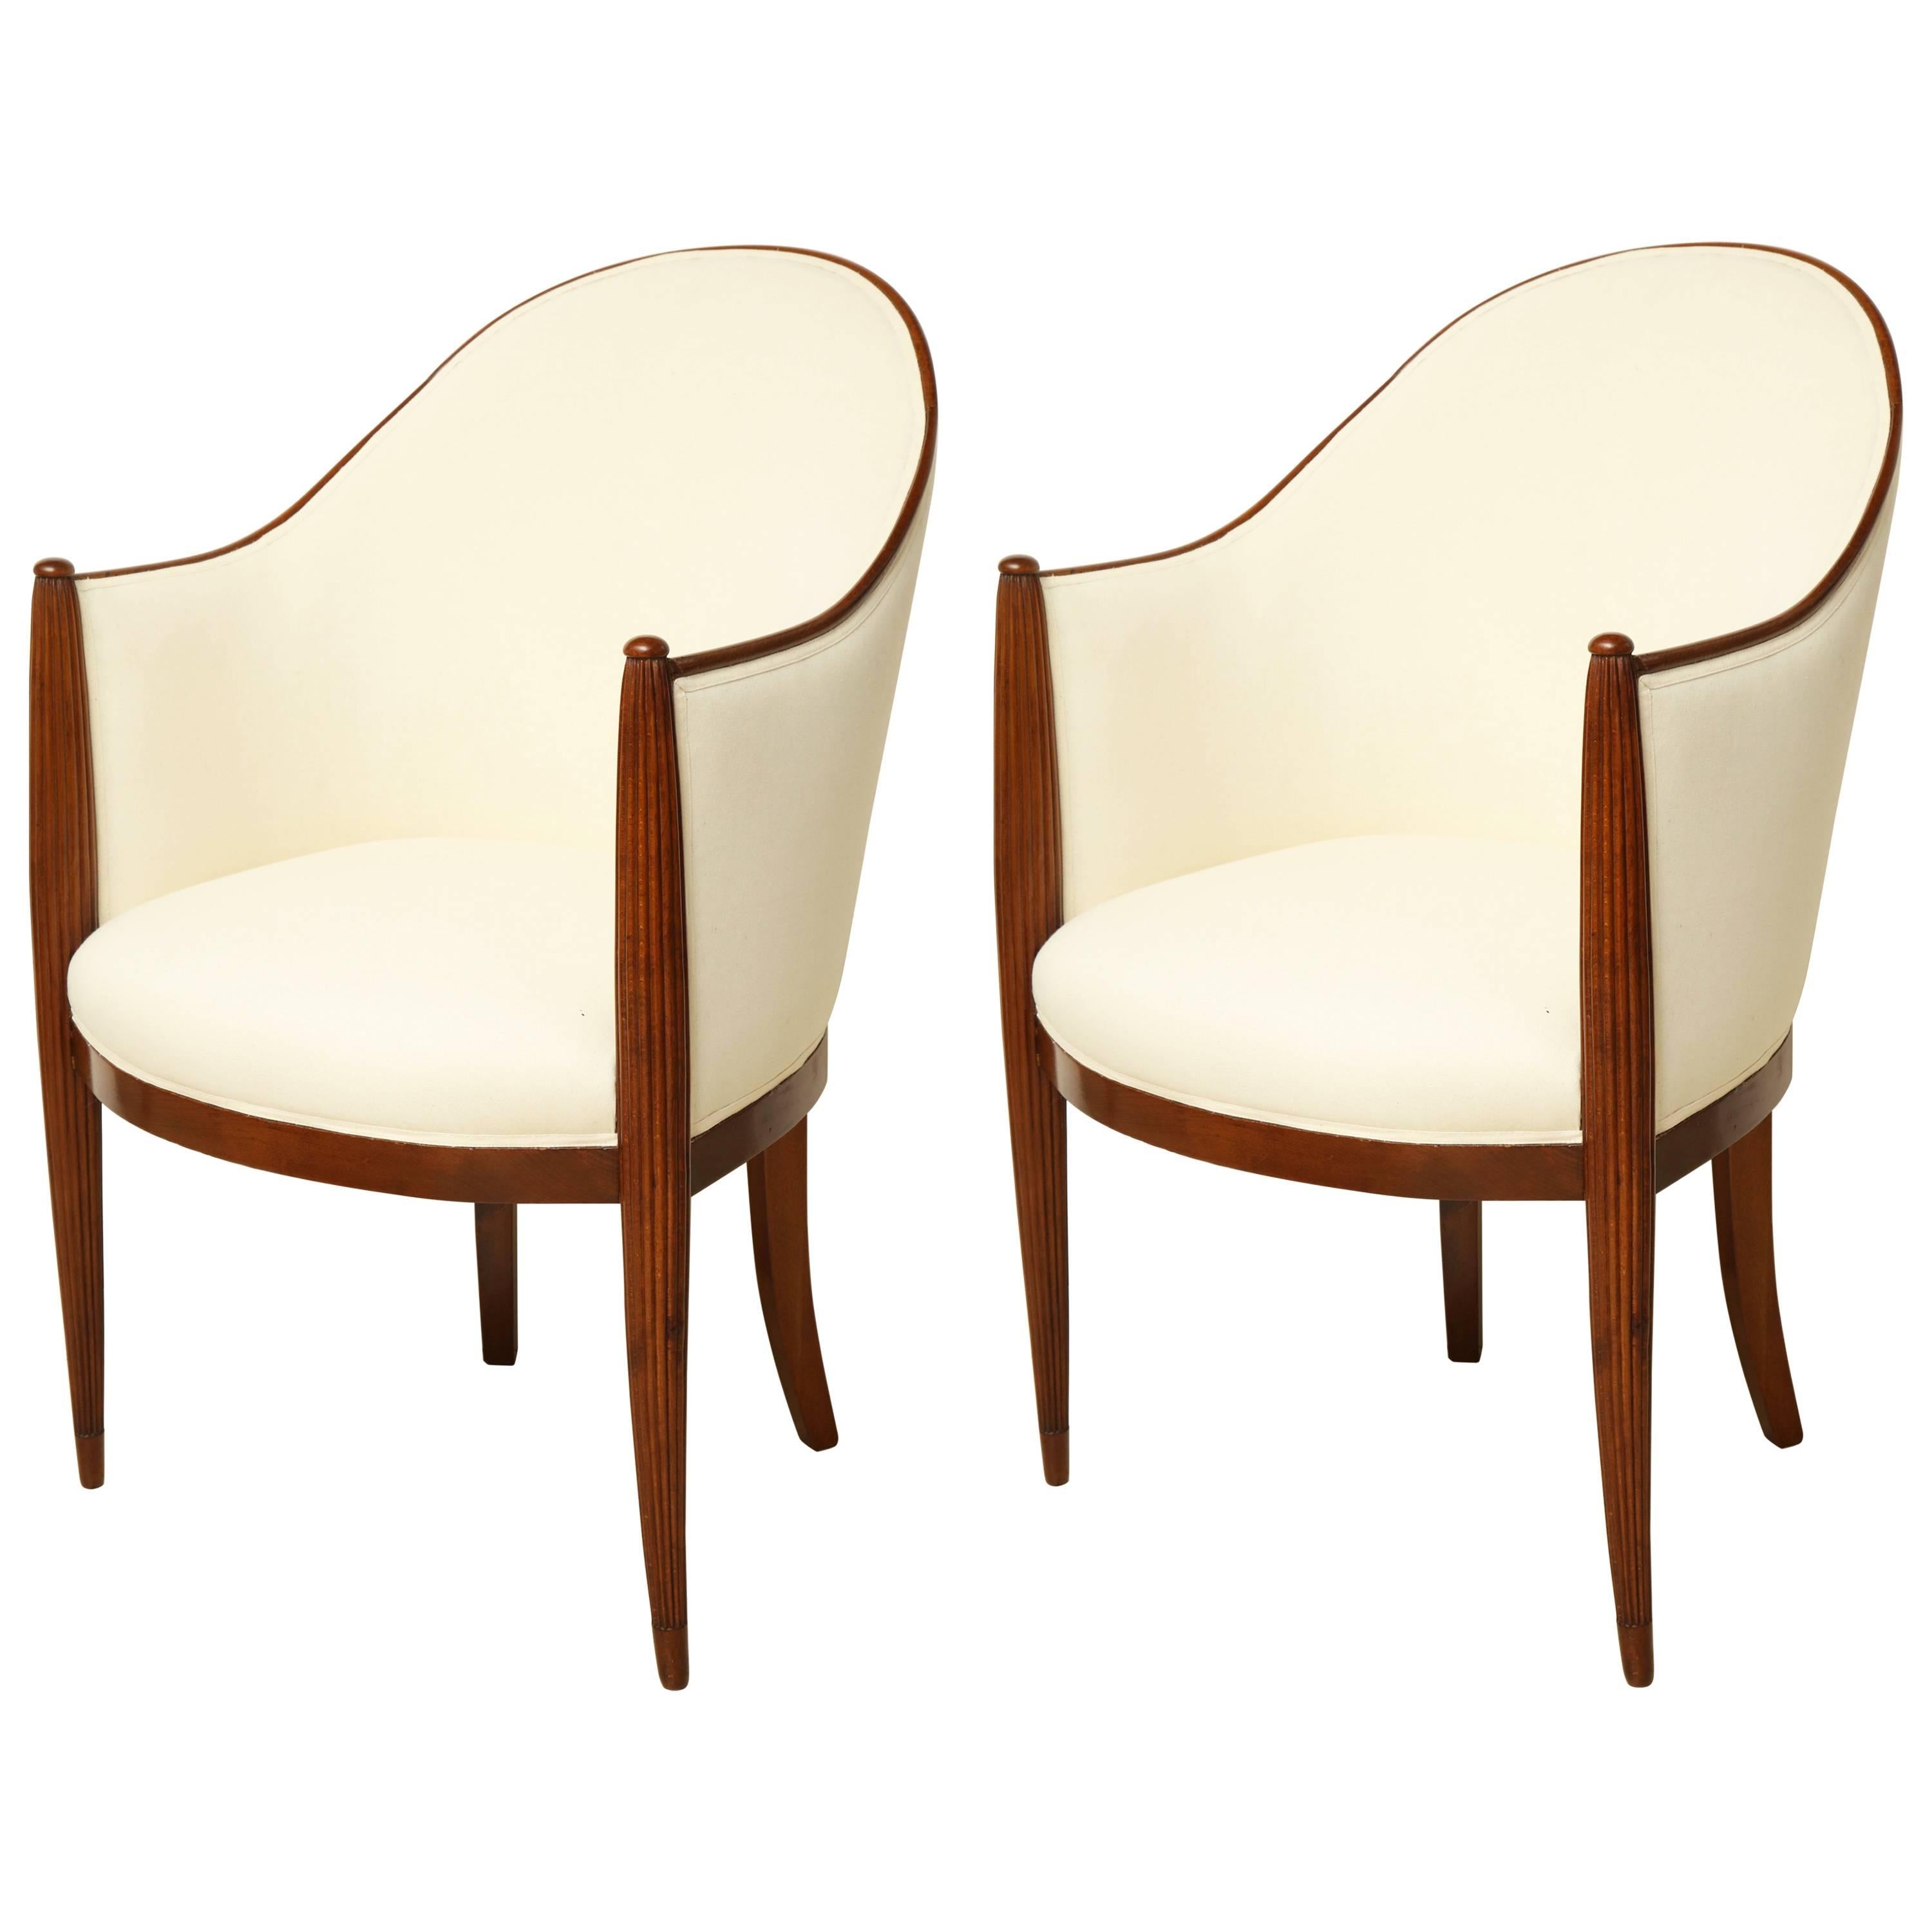 Pair of Curved French Art Deco Upholstered Chairs